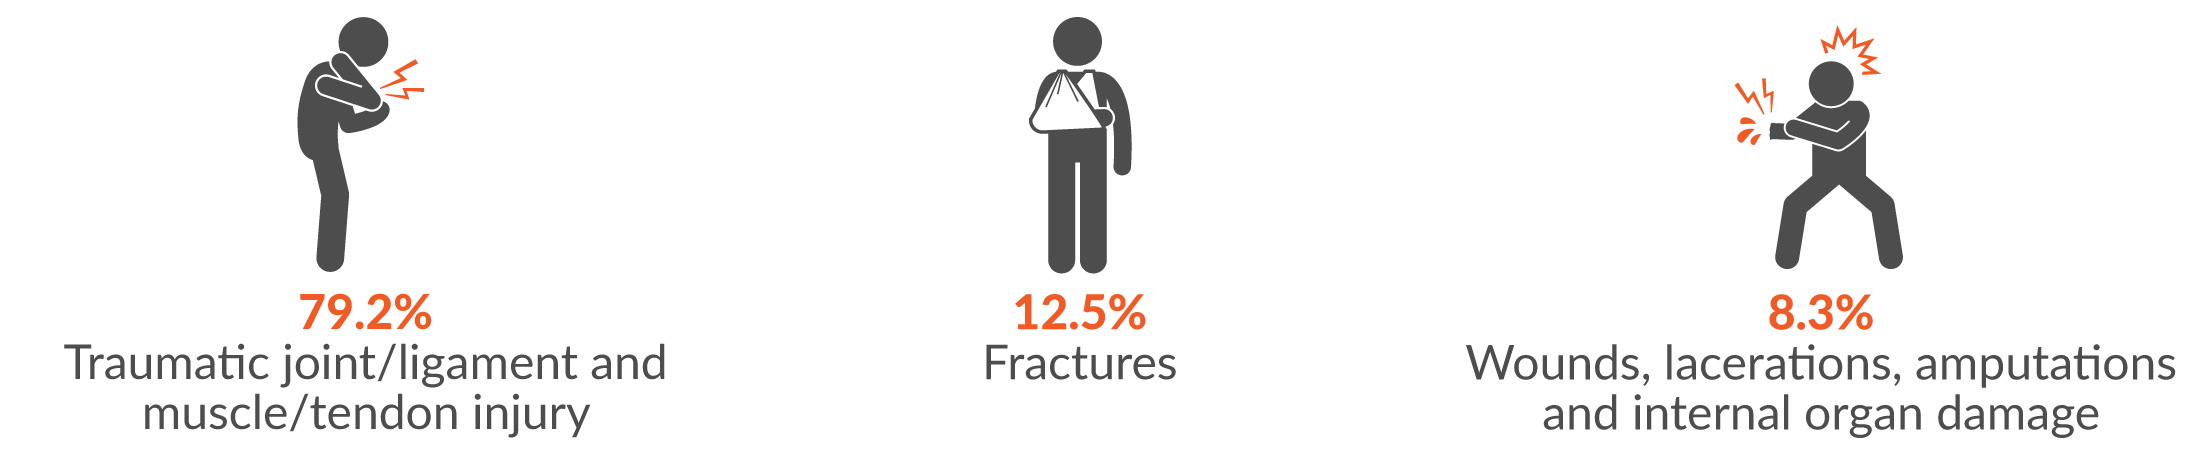 79.2% traumatic joint/ligament and muscle/tendon injury; 12.5% fractures; 8.3% wounds, lacerations, amputations and internal organ damage.